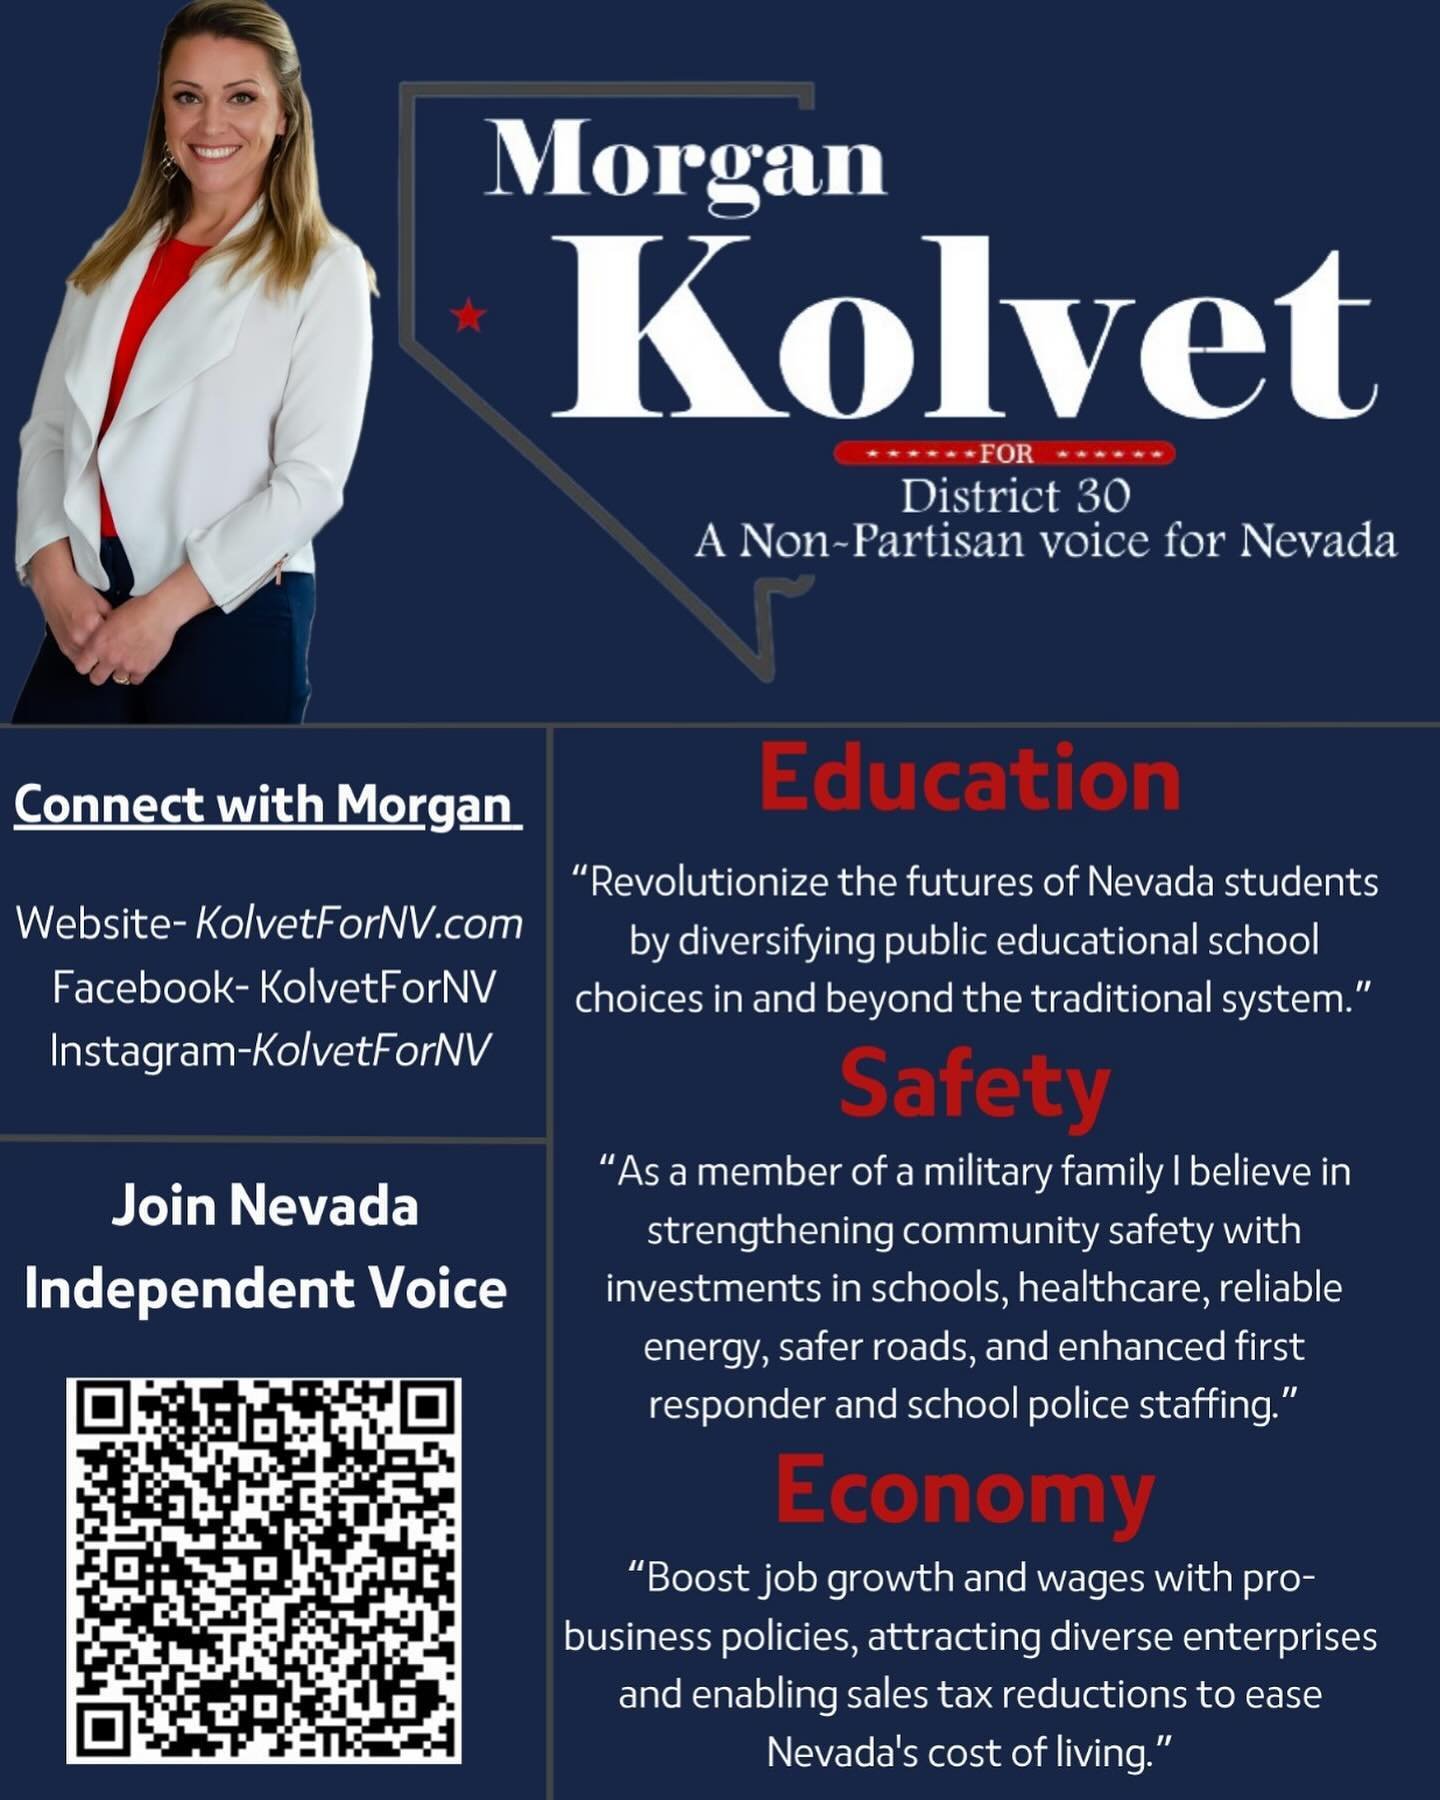 Transforming Nevada with fresh, non-partisan leadership! 🌟 Focused on revolutionizing education, enhancing community safety, and boosting economic growth. Support the change District 30 needs! 📚🛡️💼

Let&rsquo;s make a difference&mdash;vote for vi